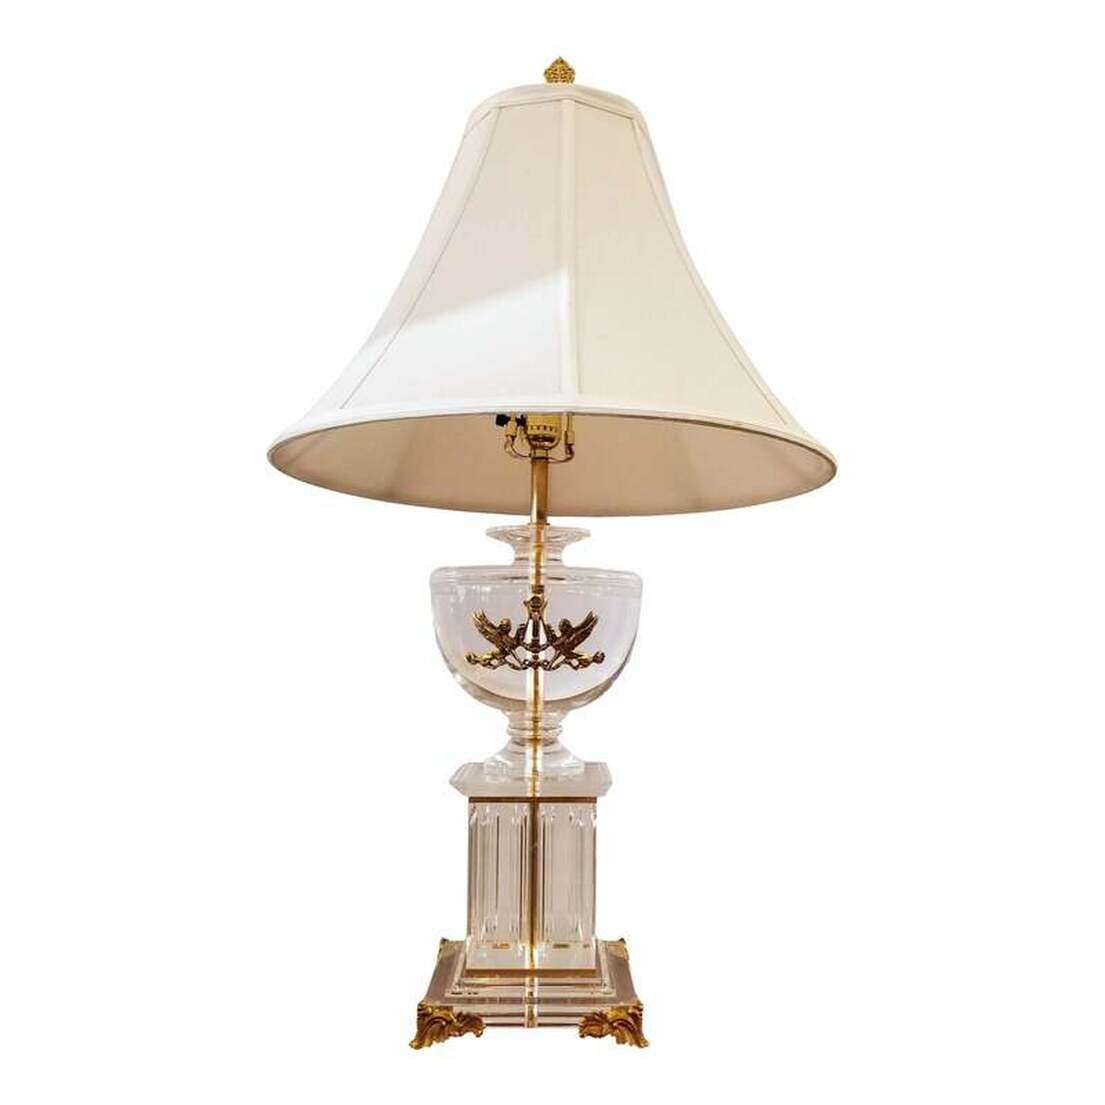 Neoclassic style table lamp in the form of a fluted column pedestal on gilt acanthus scroll feet surmounted by a lebes urn fronted with a gilt pair of sphinx on either side of a lyre.  The base material is clear acrylic thermoplastic resin, known by the trade name Lucite.  The brass spacers and hardware are brass.  The light turns on via a 3-way rotary lamp switch.